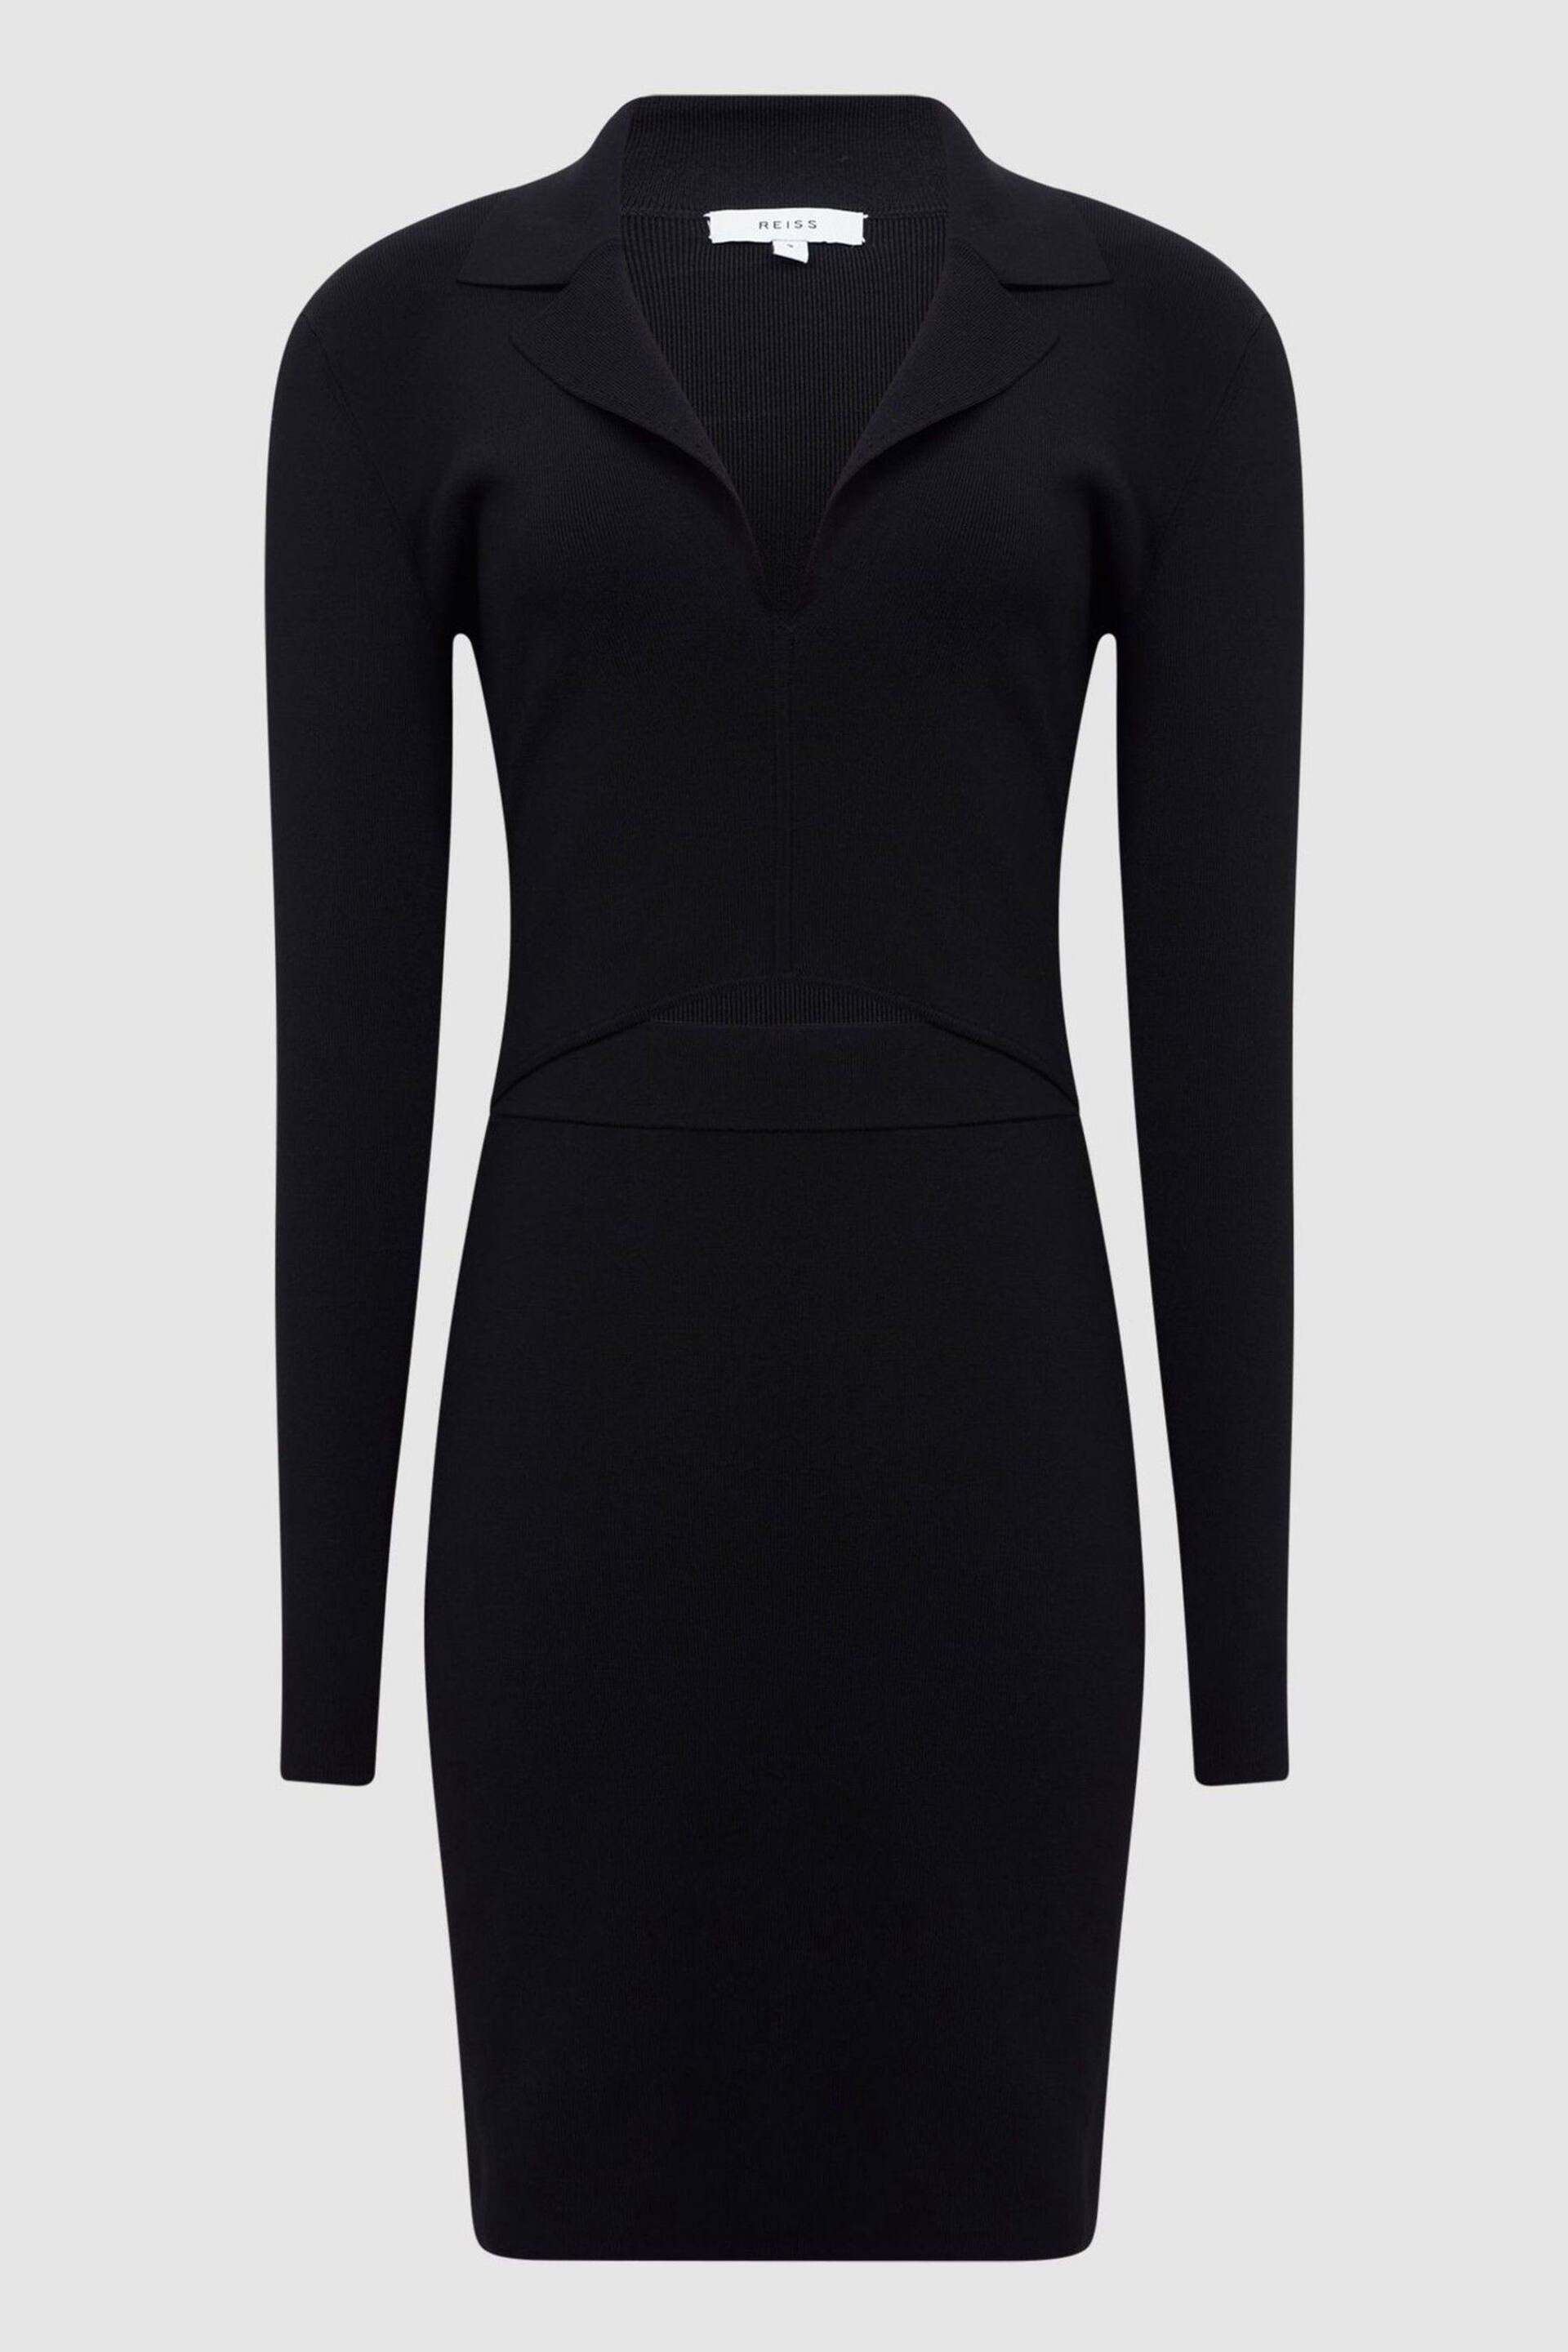 Reiss Black Freya Cut-Out Collared Knitted Bodycon Dress - Image 2 of 5